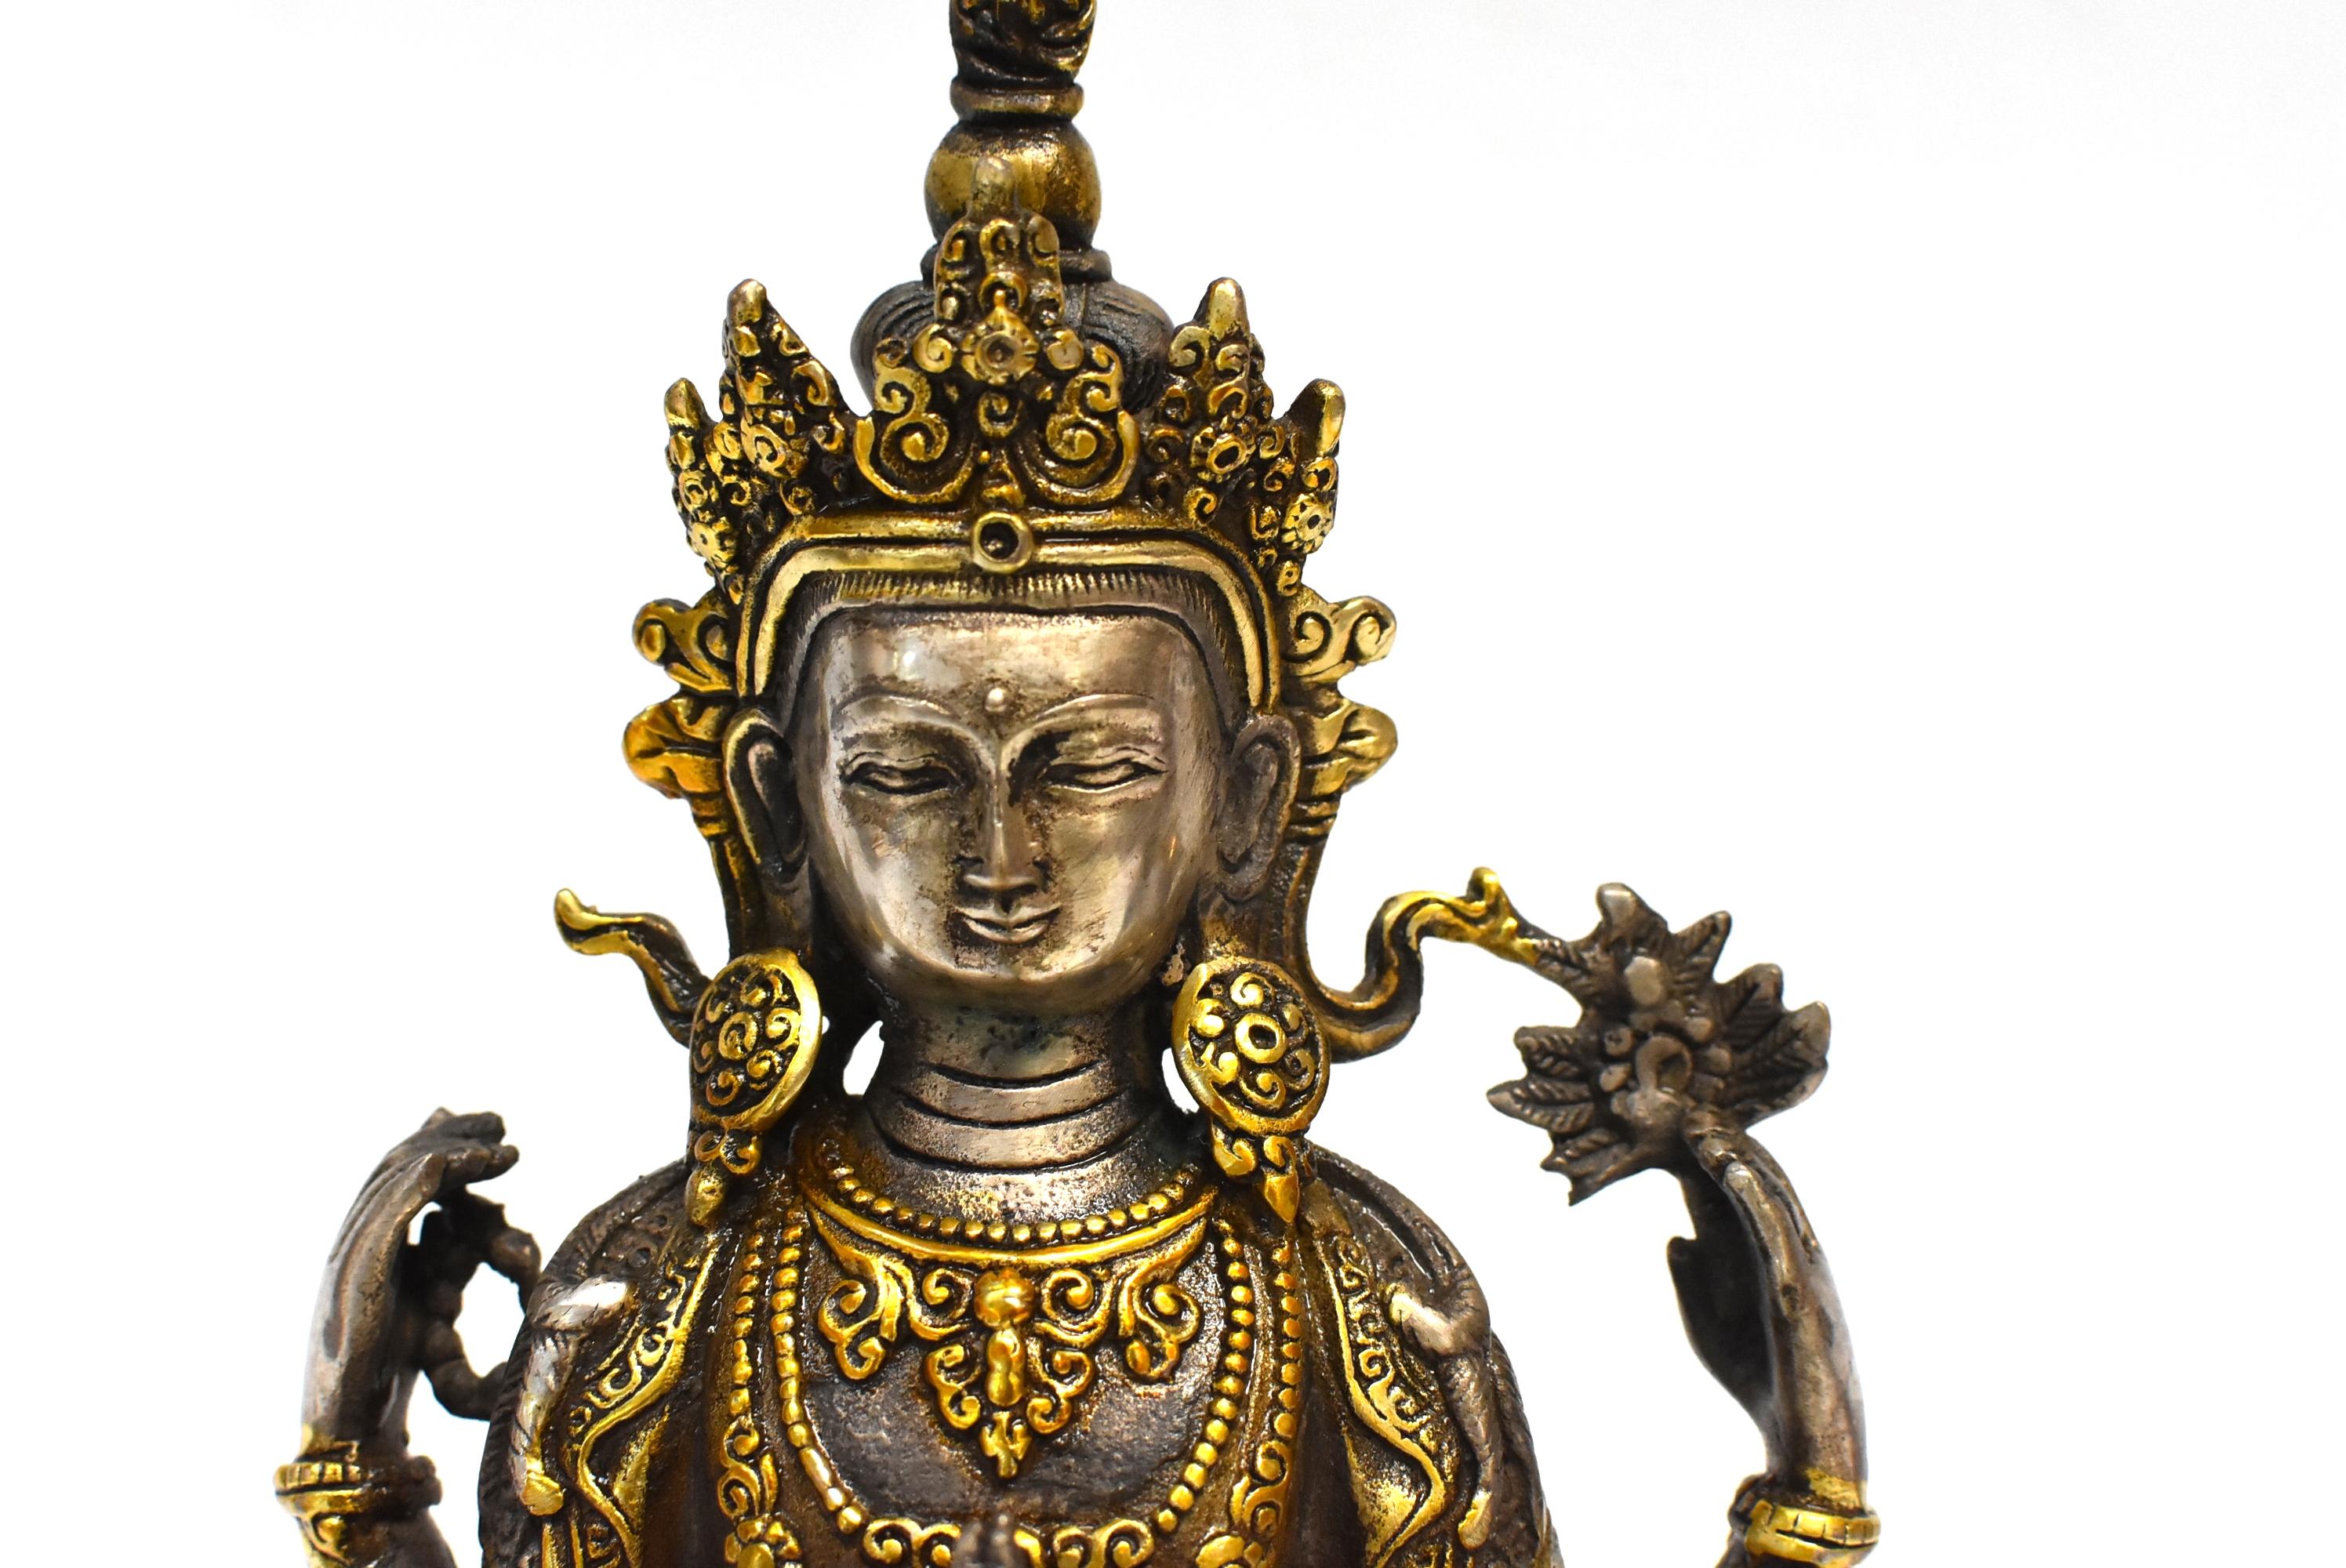 A beautiful statue of Tibetan Bodhisattva The White Tara. She is the Goddess of Great Compassion who is known to answer prayers quickly and bring blessings to people when they need them the most. In this statue she wears a high crown and an embossed